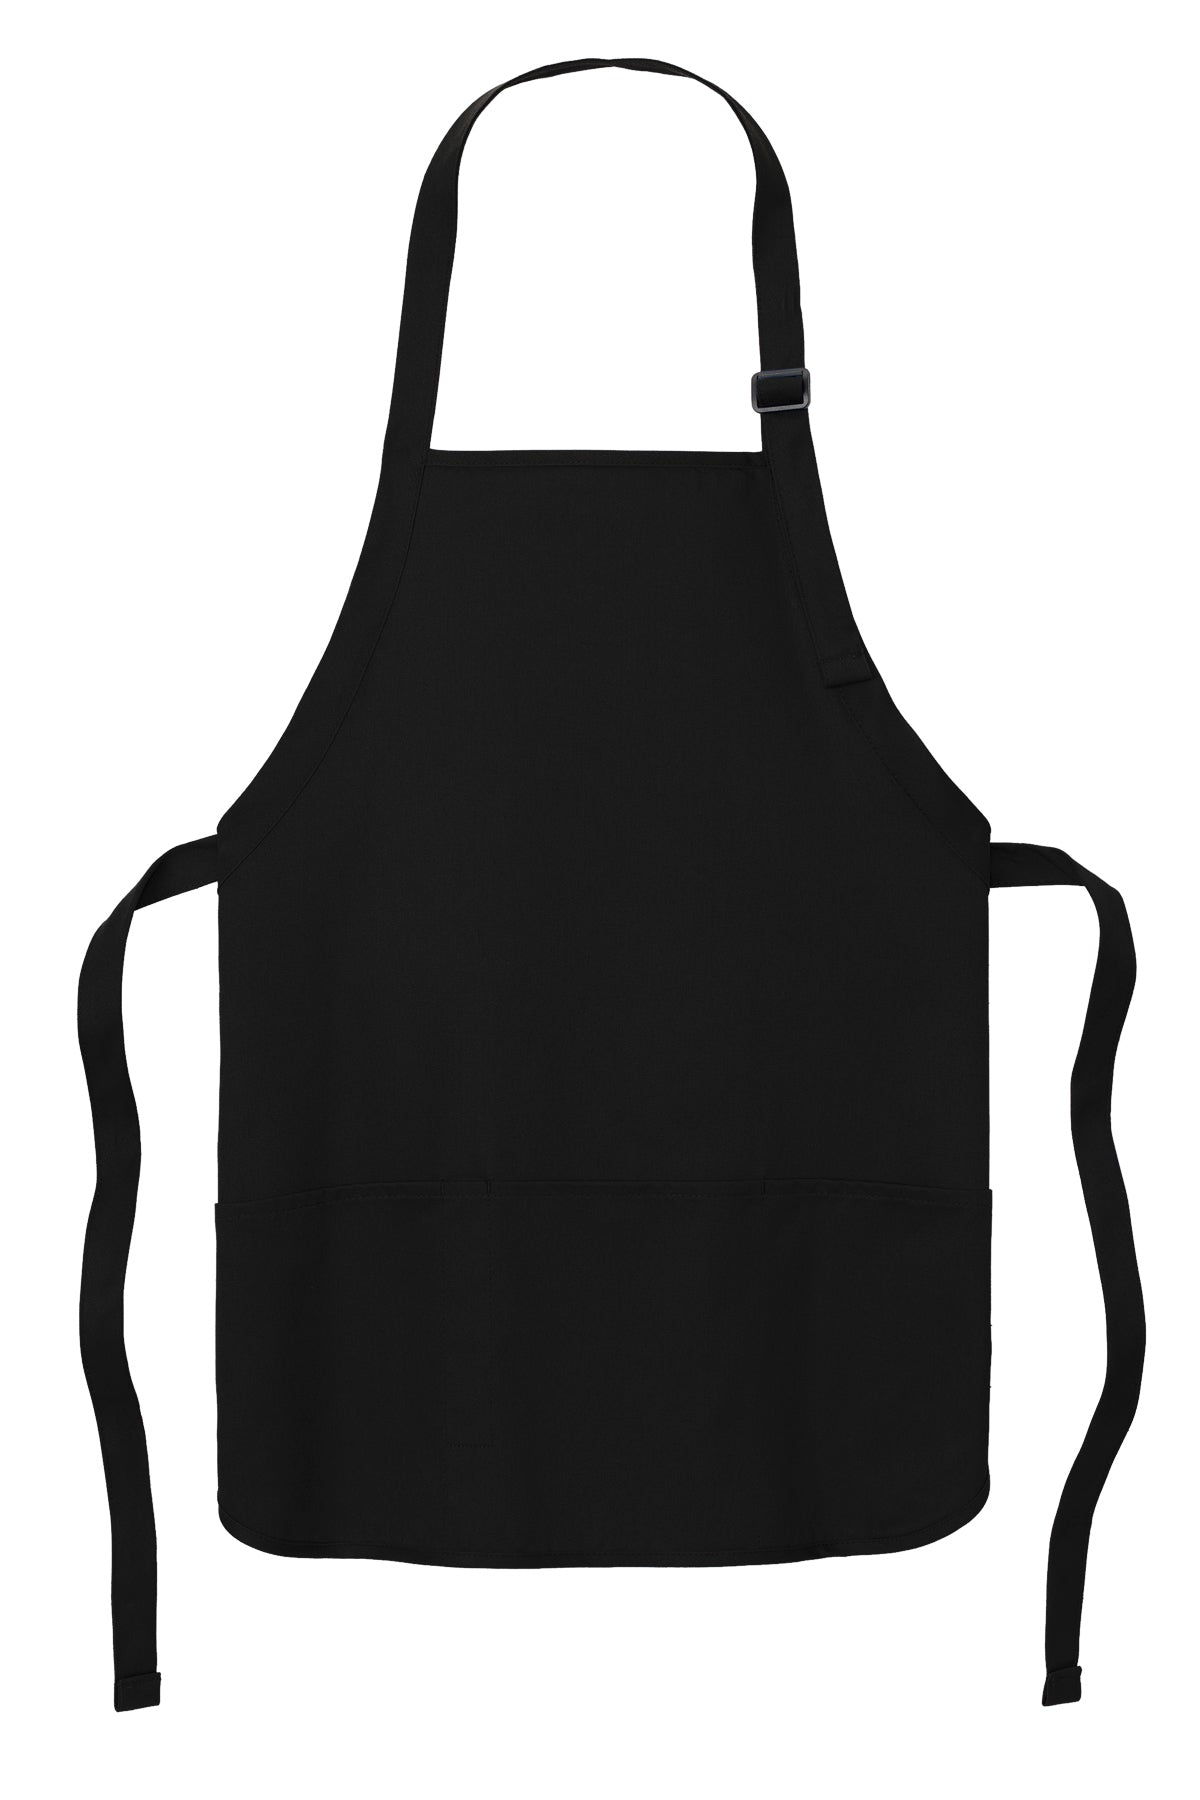 Port Authority Medium-Length Apron with Pouch Pockets A510 Black